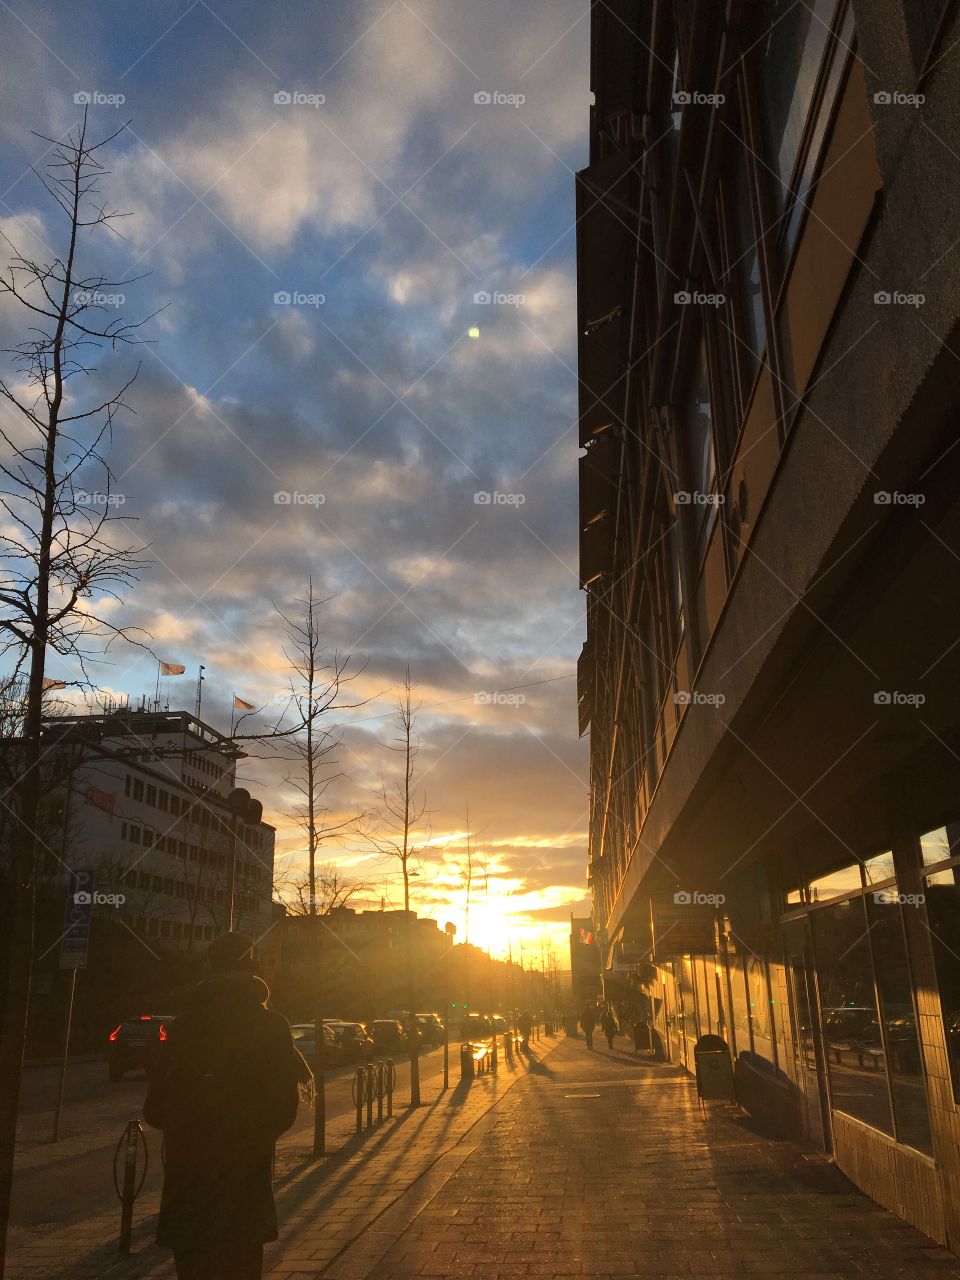 Amazing sunset in Stockholm, Södermalm 